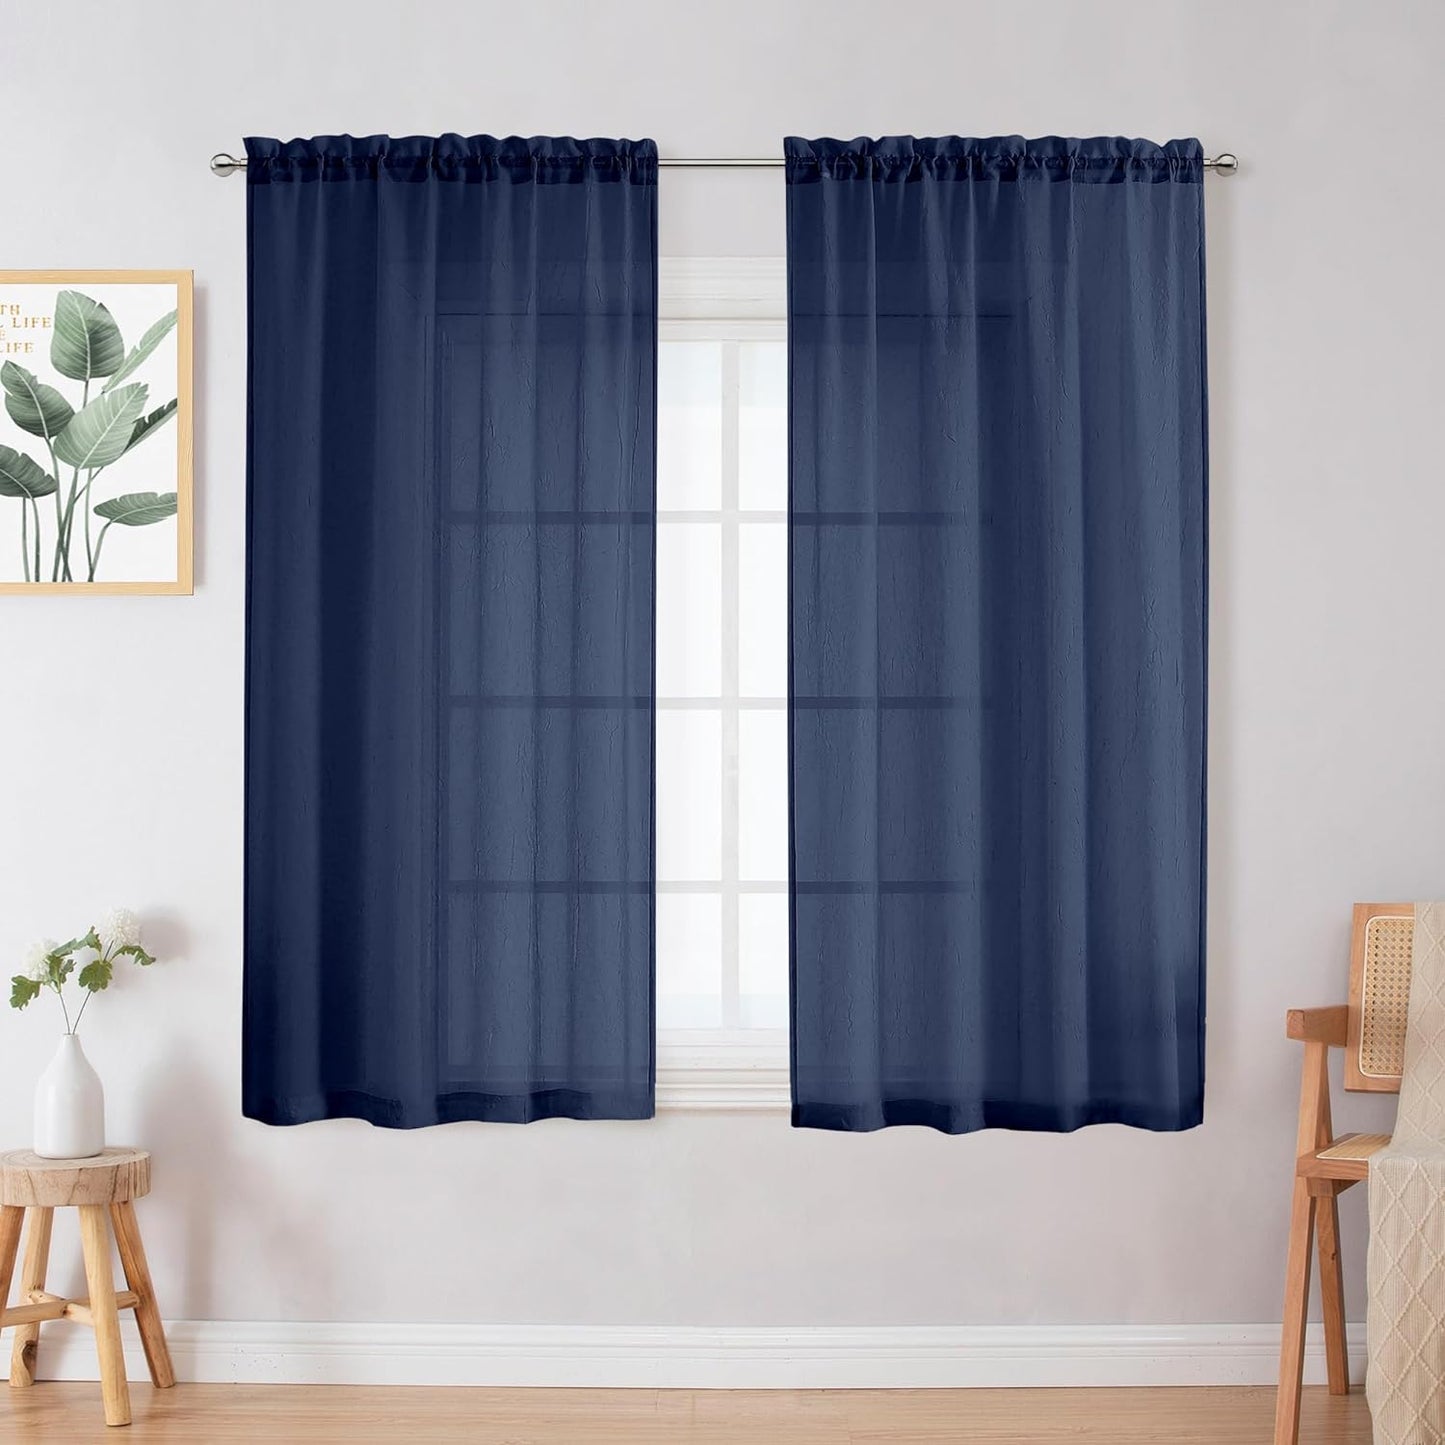 Crushed Sheer White Curtains 63 Inch Length 2 Panels, Light Filtering Solid Crinkle Voile Short Sheer Curtian for Bedroom Living Room, Each 42Wx63L Inches  Chyhomenyc Navy Blue 28 W X 45 L 